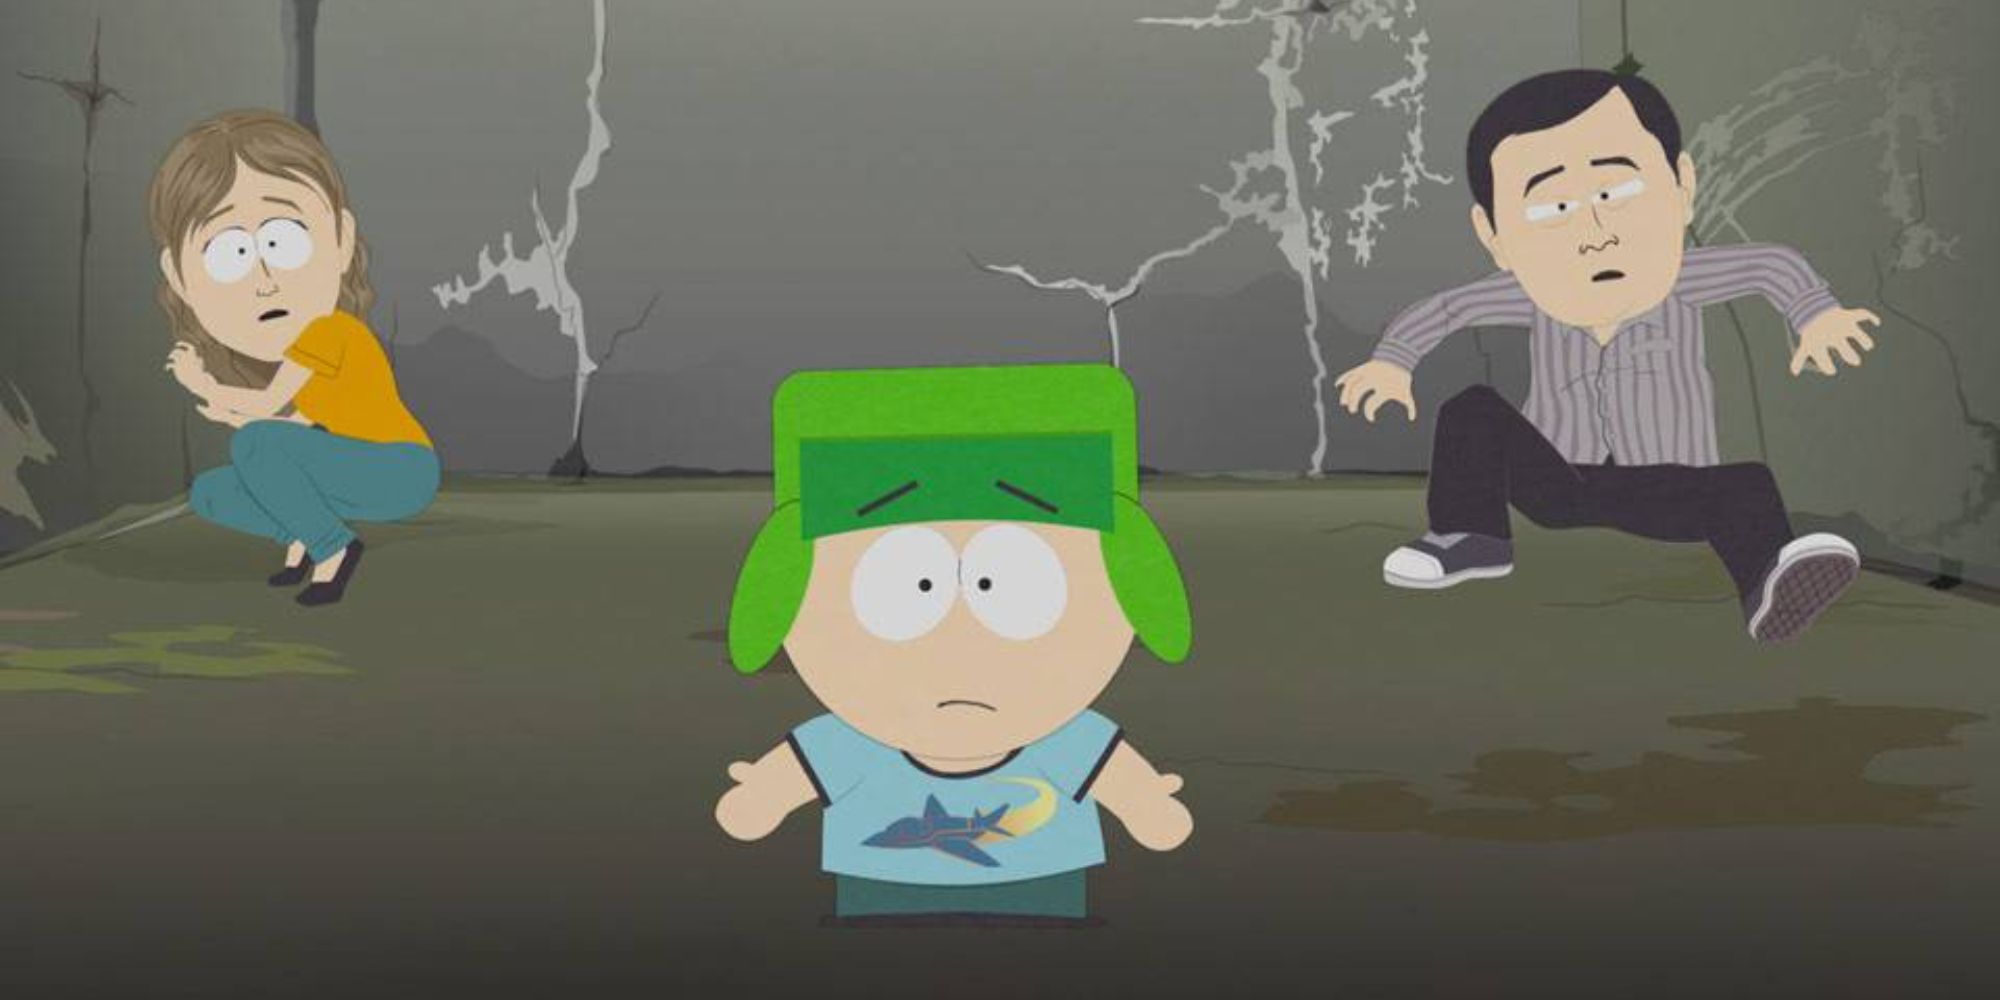 Kyle and two strangers sit in a jail cell in South Park